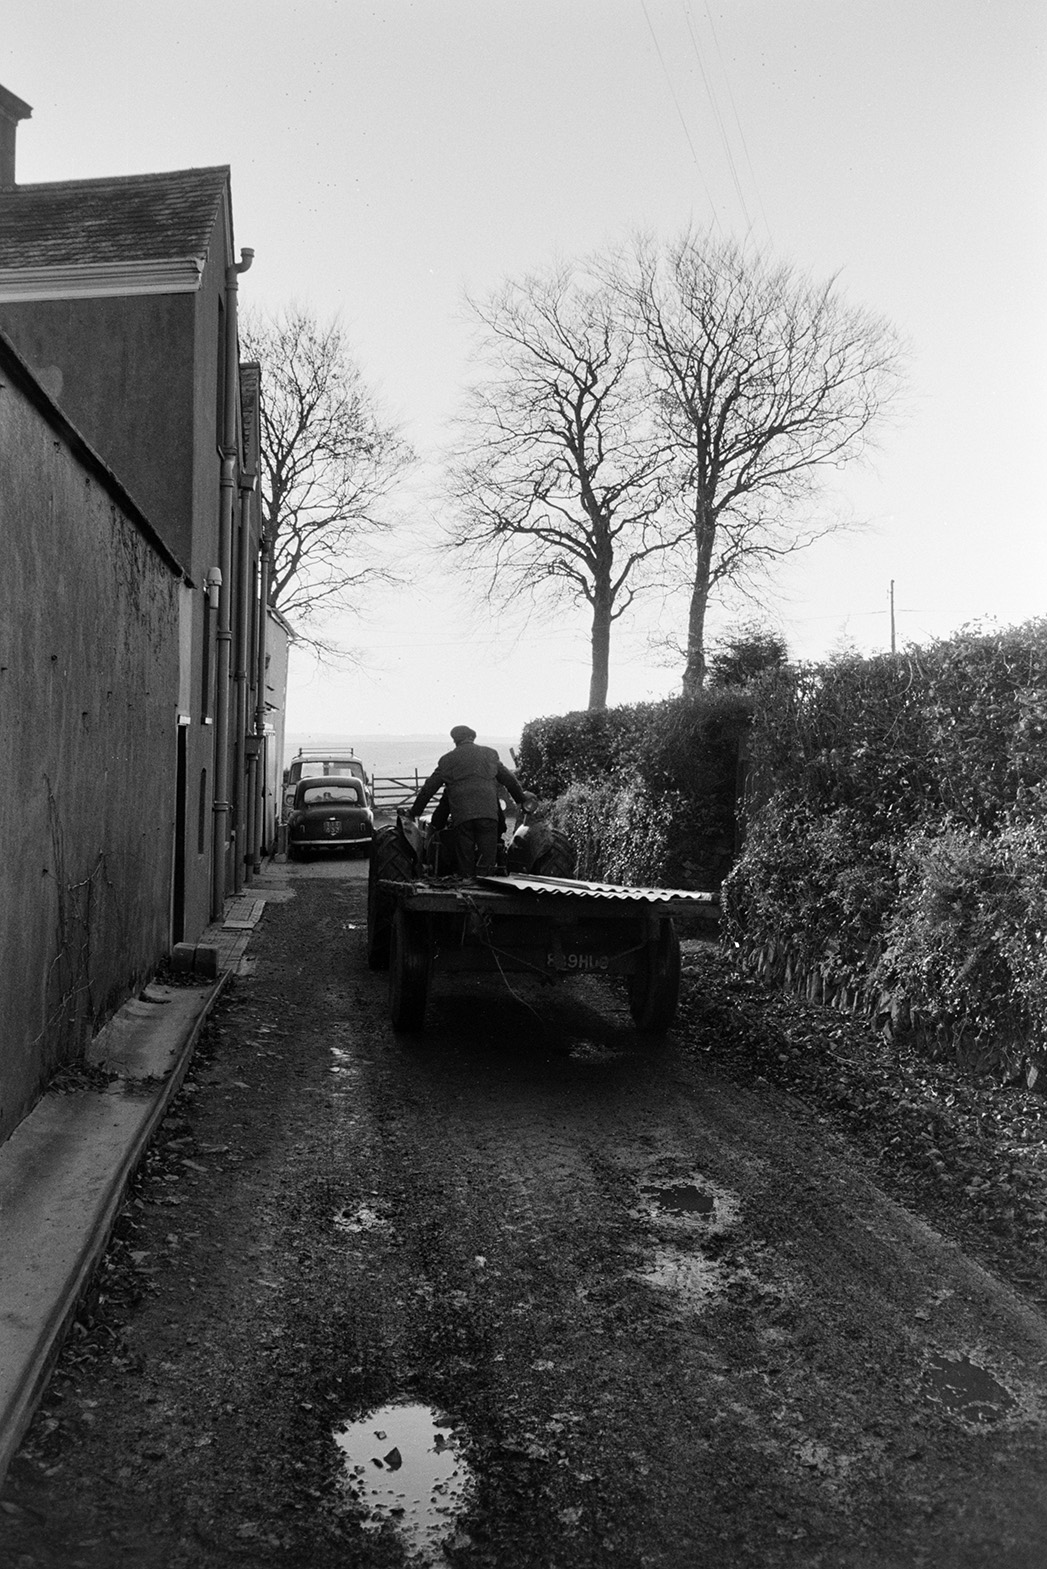 Ivor Bourne stood on the back of a tractor and trailer with a corrugated iron sheet, in a lane at Beaford. The corrugated iron sheets were used on a barn exterior.